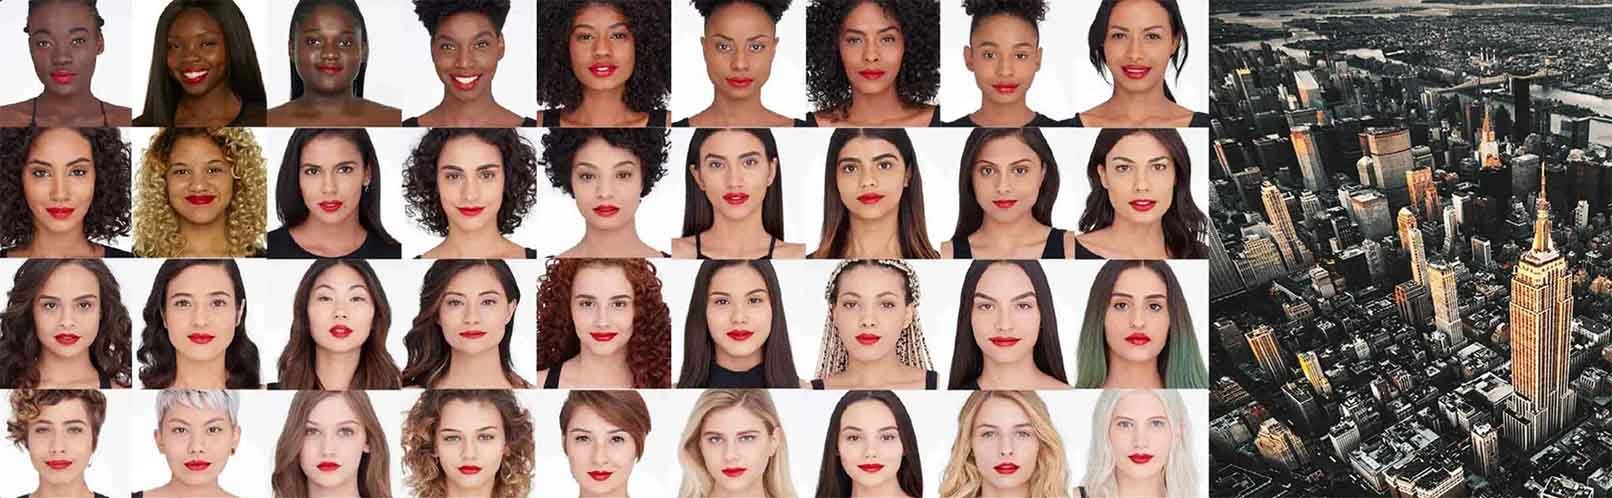 Thirty six faces of women with different skin tones wearing same red lipstick